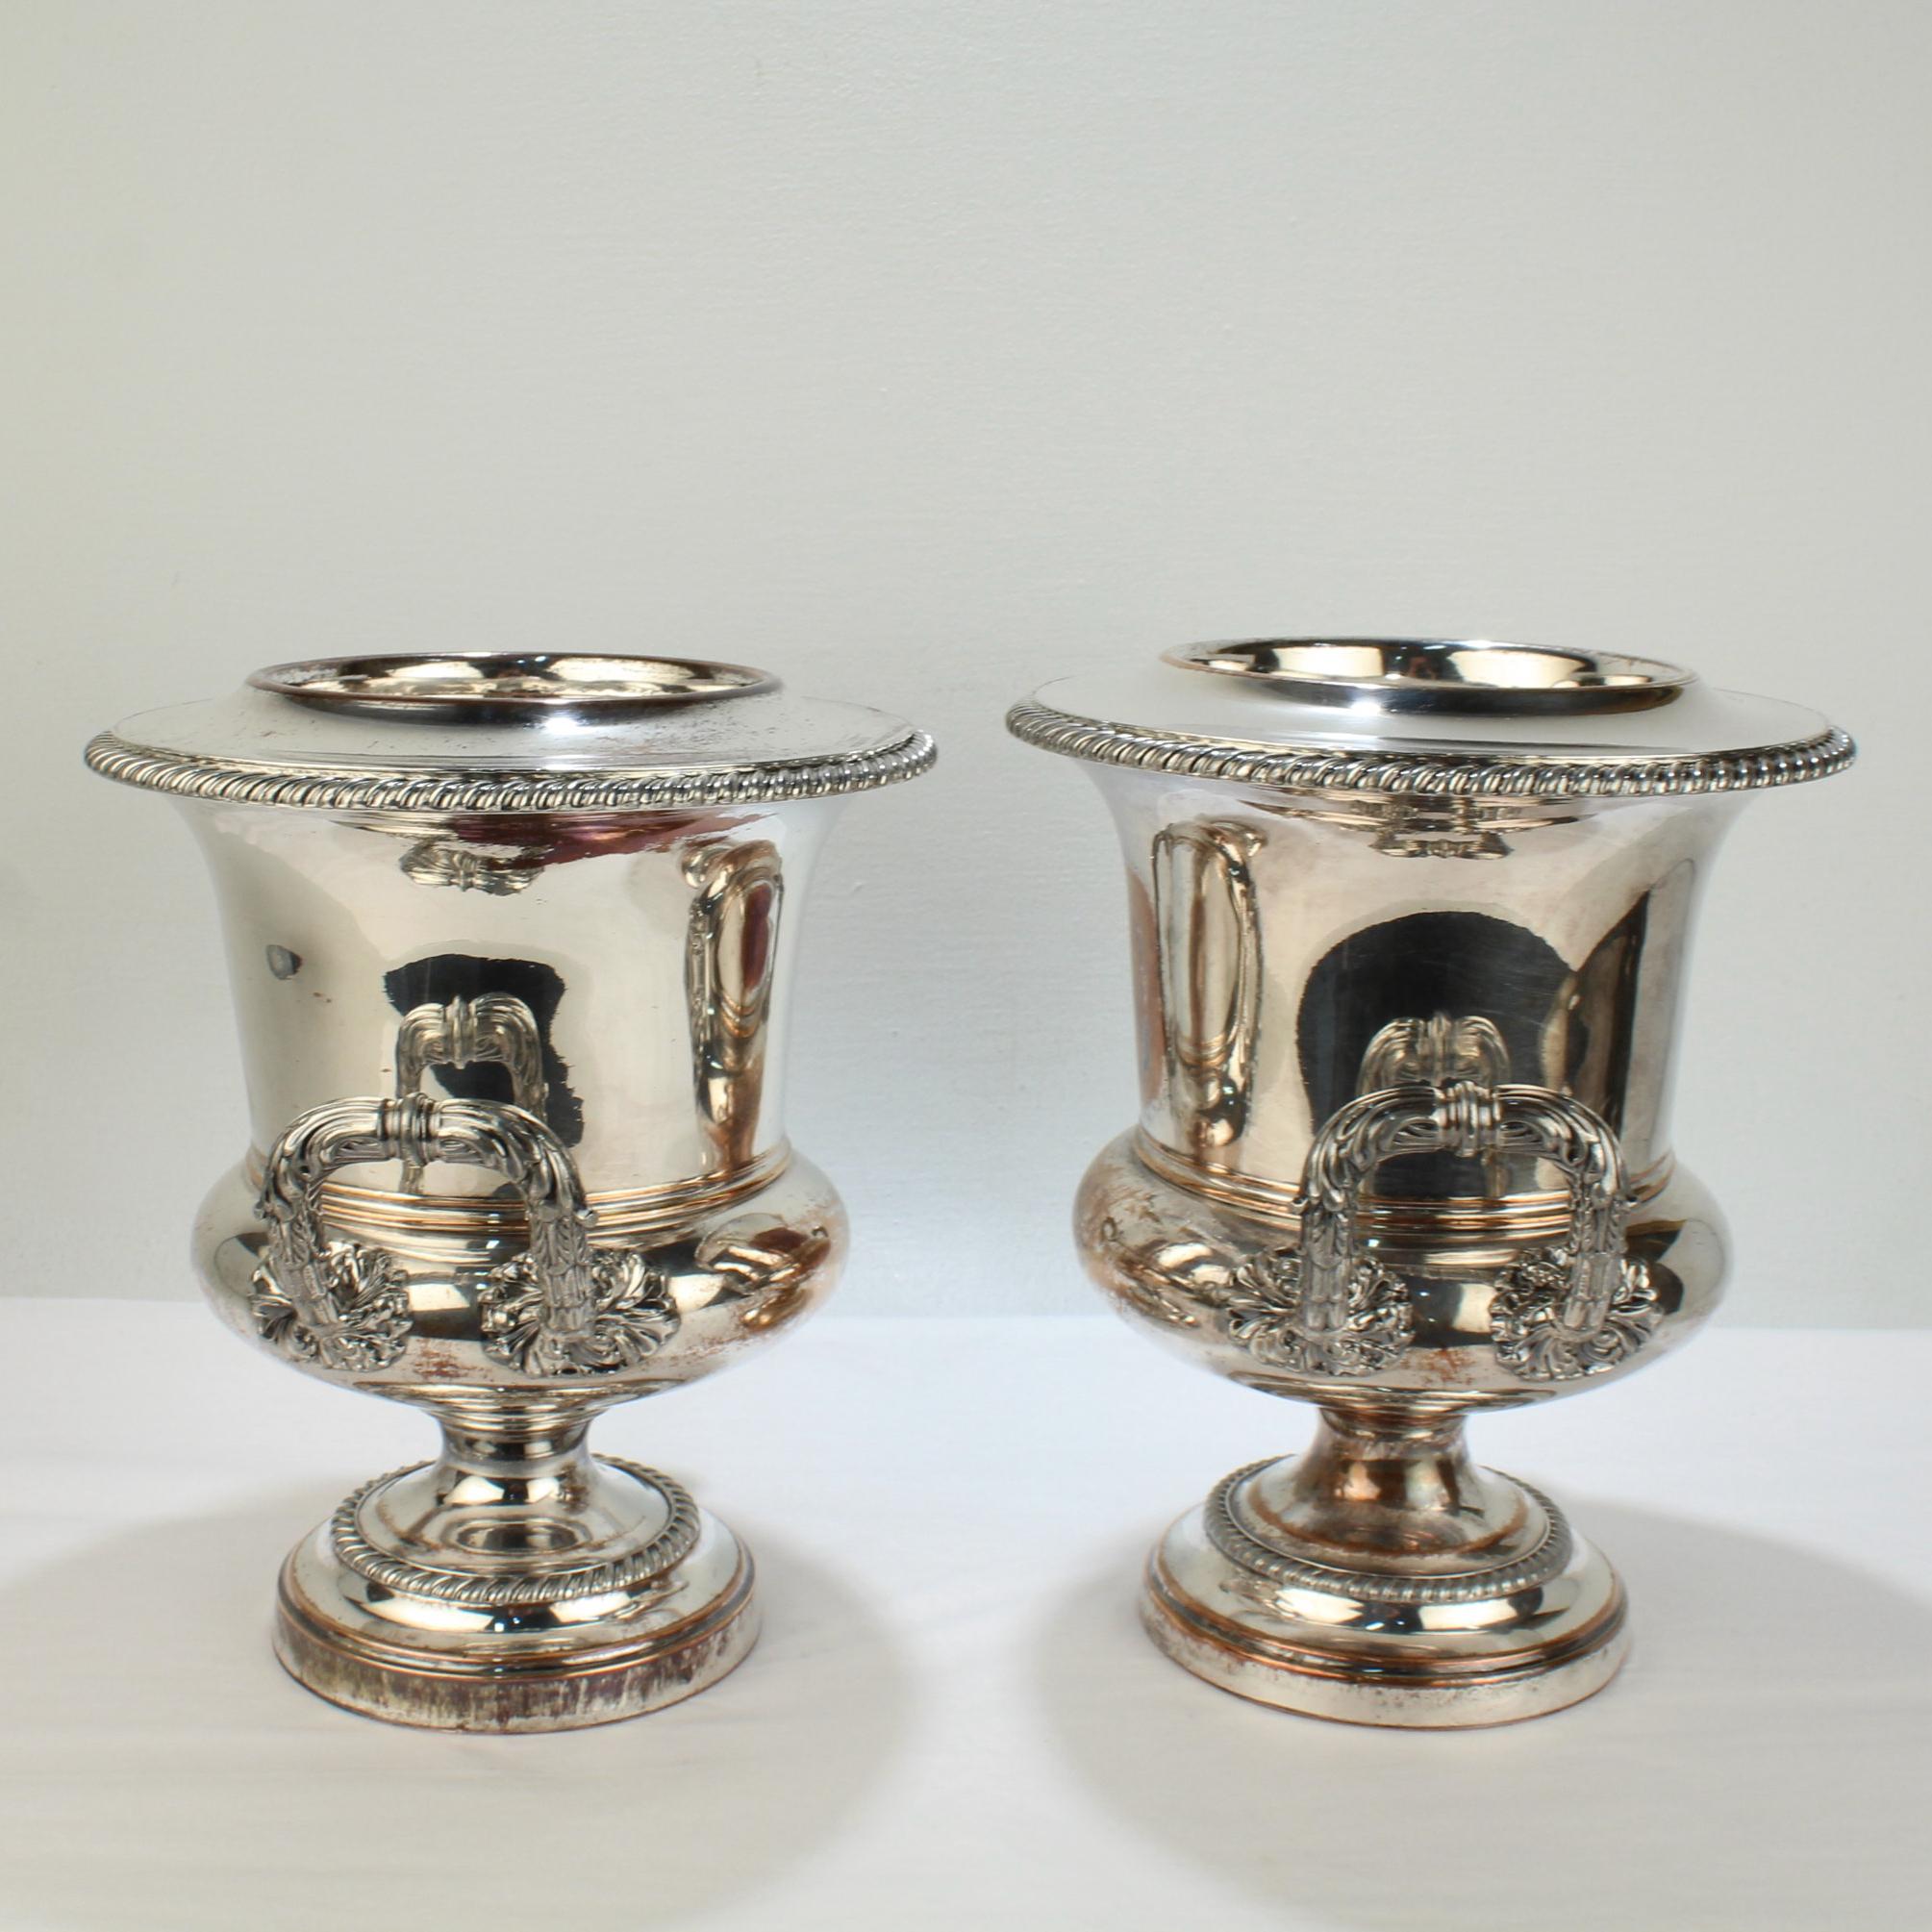 Pair of Antique English Sheffield Silverplate Wine or Champagne Coolers In Fair Condition For Sale In Philadelphia, PA